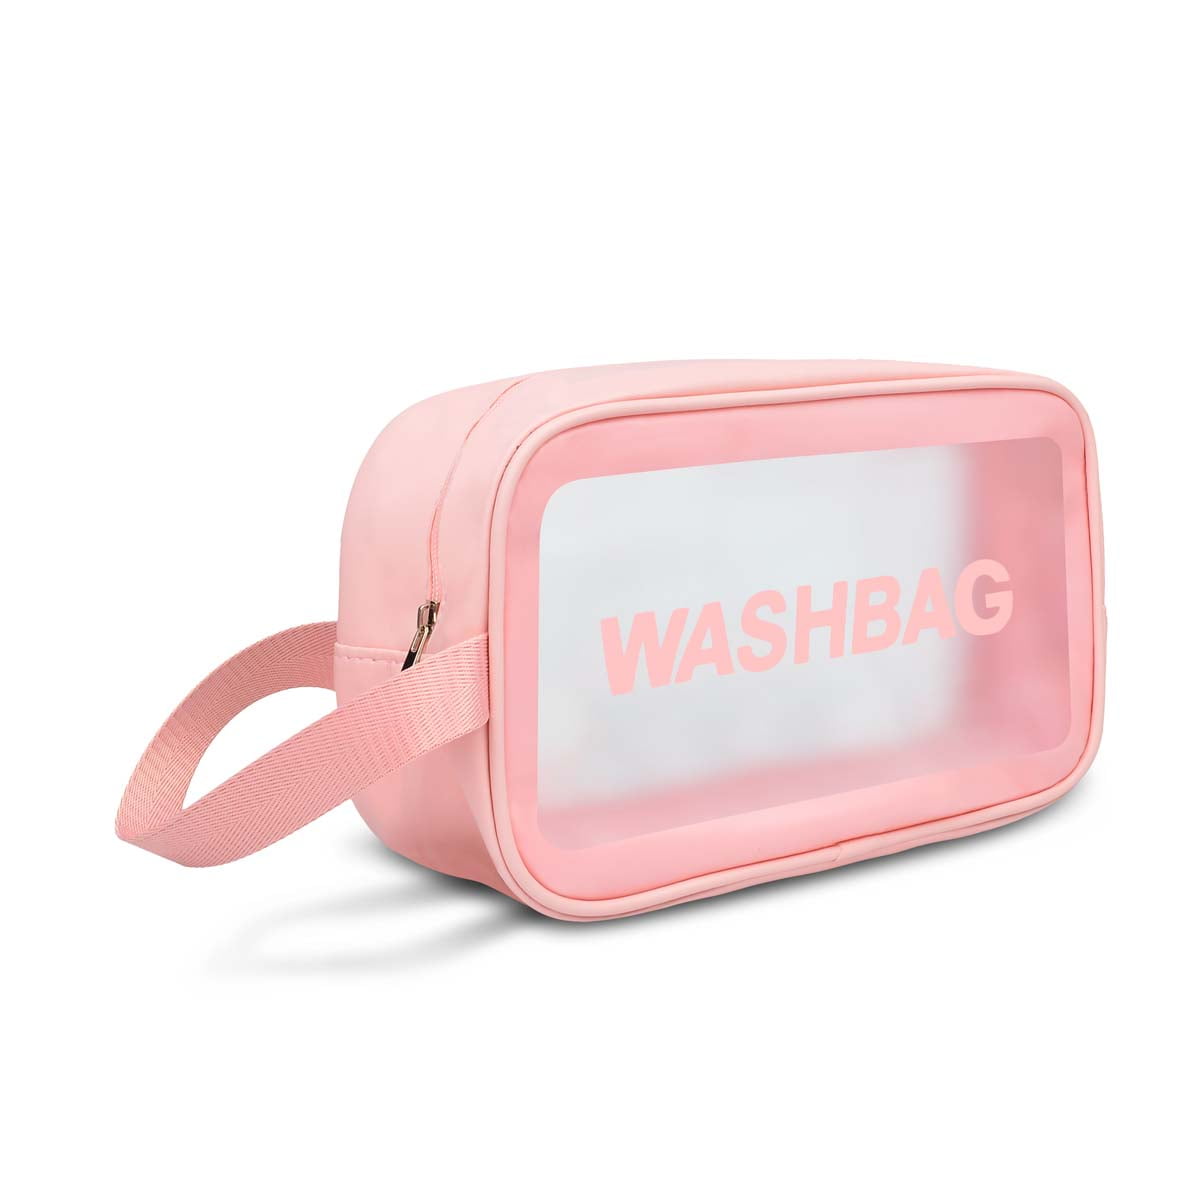 Benevolence La Toiletry Bag for Women Travel and Cosmetics - Small, Dusty Pink, Size: 6.7 x 5.1 x 3.5